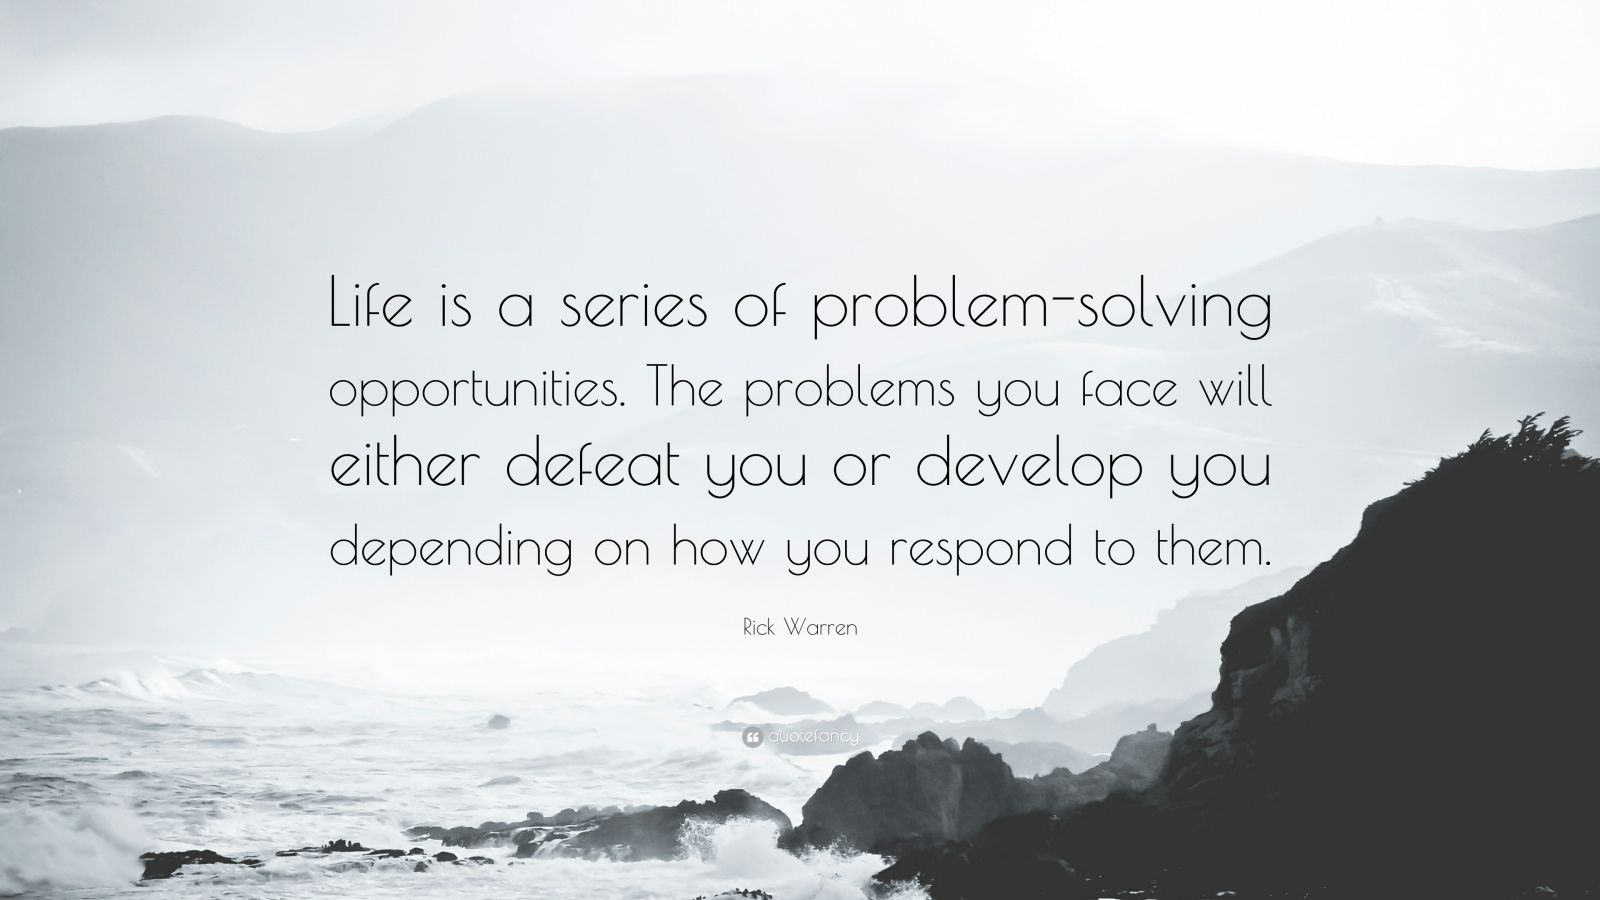 Rick Warren Quote: “Life is a series of problem-solving opportunities